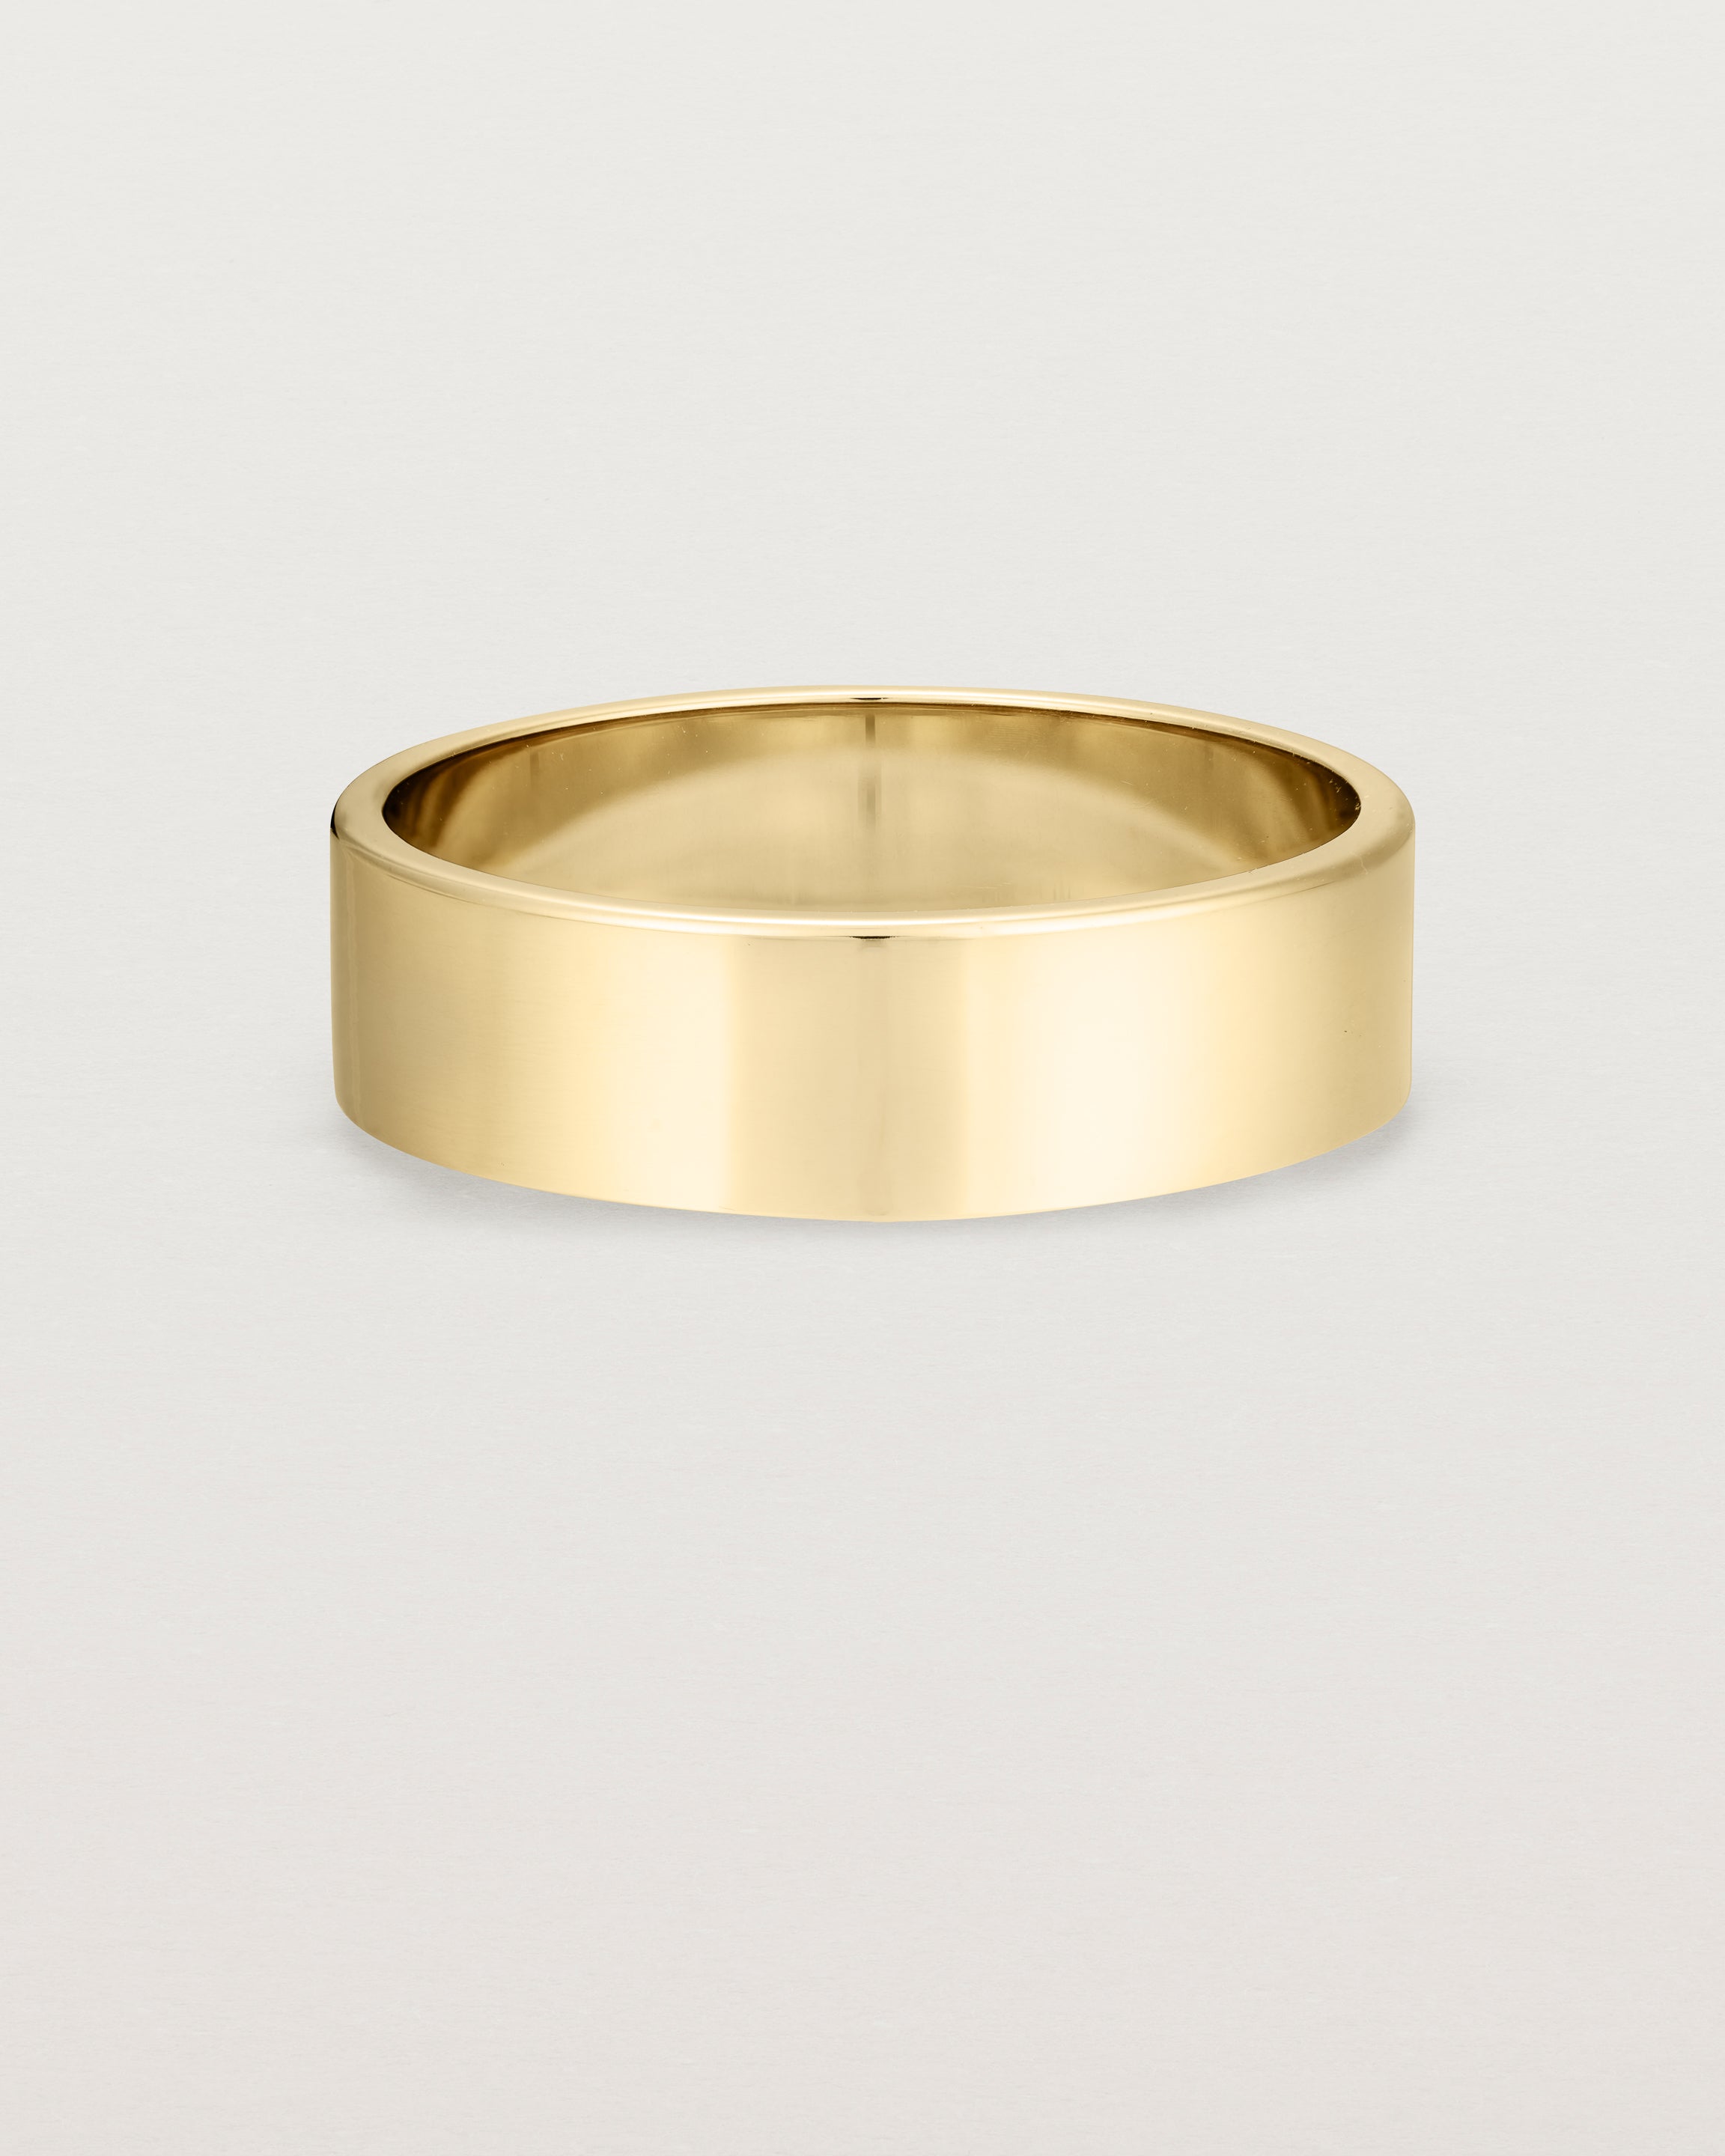 Our square profile, 6mm flat wedding band crafted in yellow gold